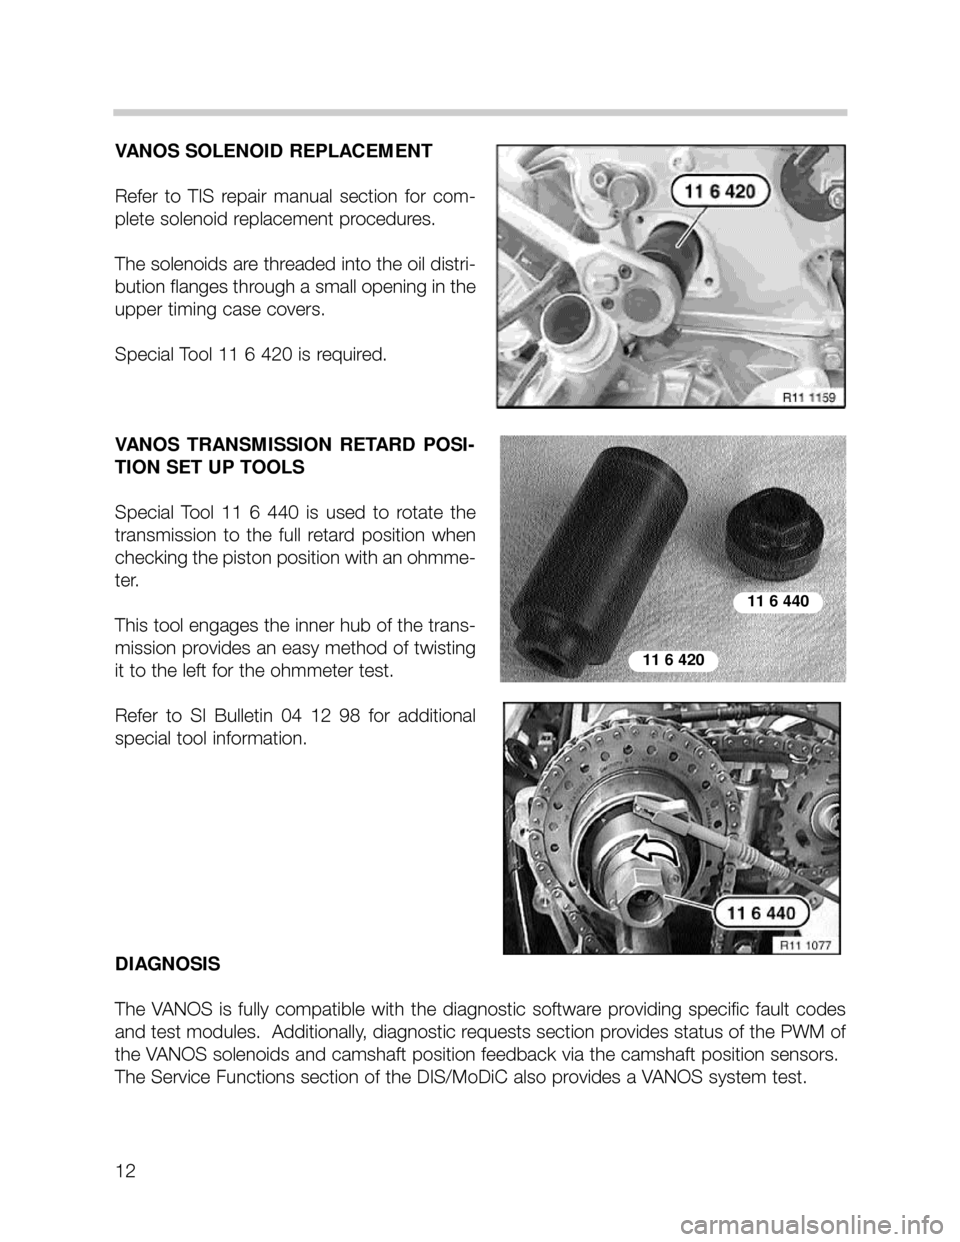 BMW 740i 2000 E38 M62TU Engine Workshop Manual 12
VANOS SOLENOID REPLACEMENT
Refer  to  TIS  repair  manual  section  for  com-
plete solenoid replacement procedures.  
The solenoids are threaded into the oil distri-
bution flanges through a small